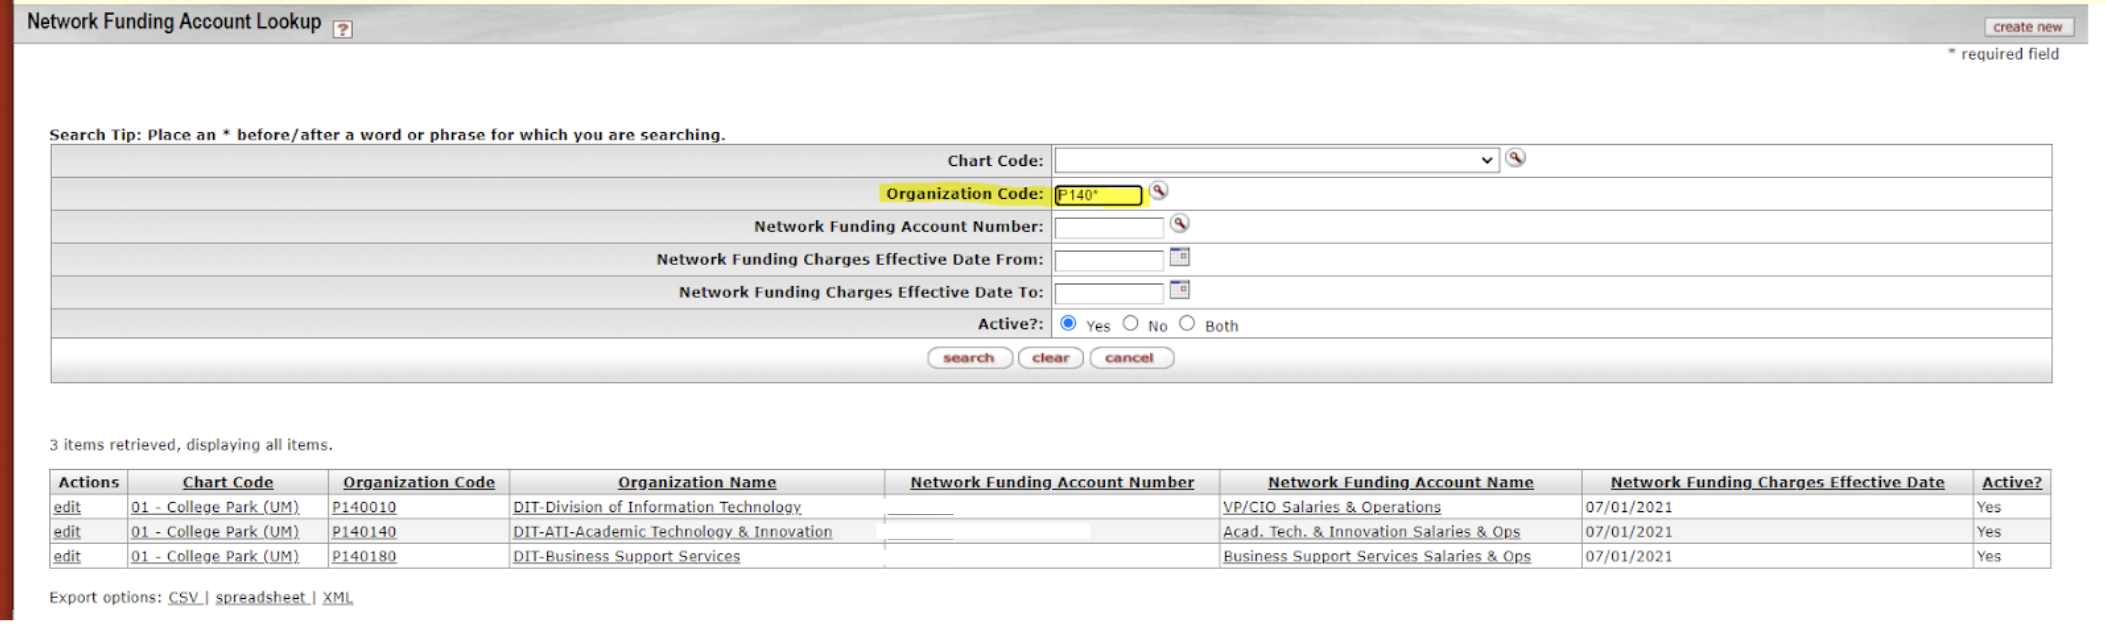 Screenshot of Network funding account lookup search with wildcard P140*.